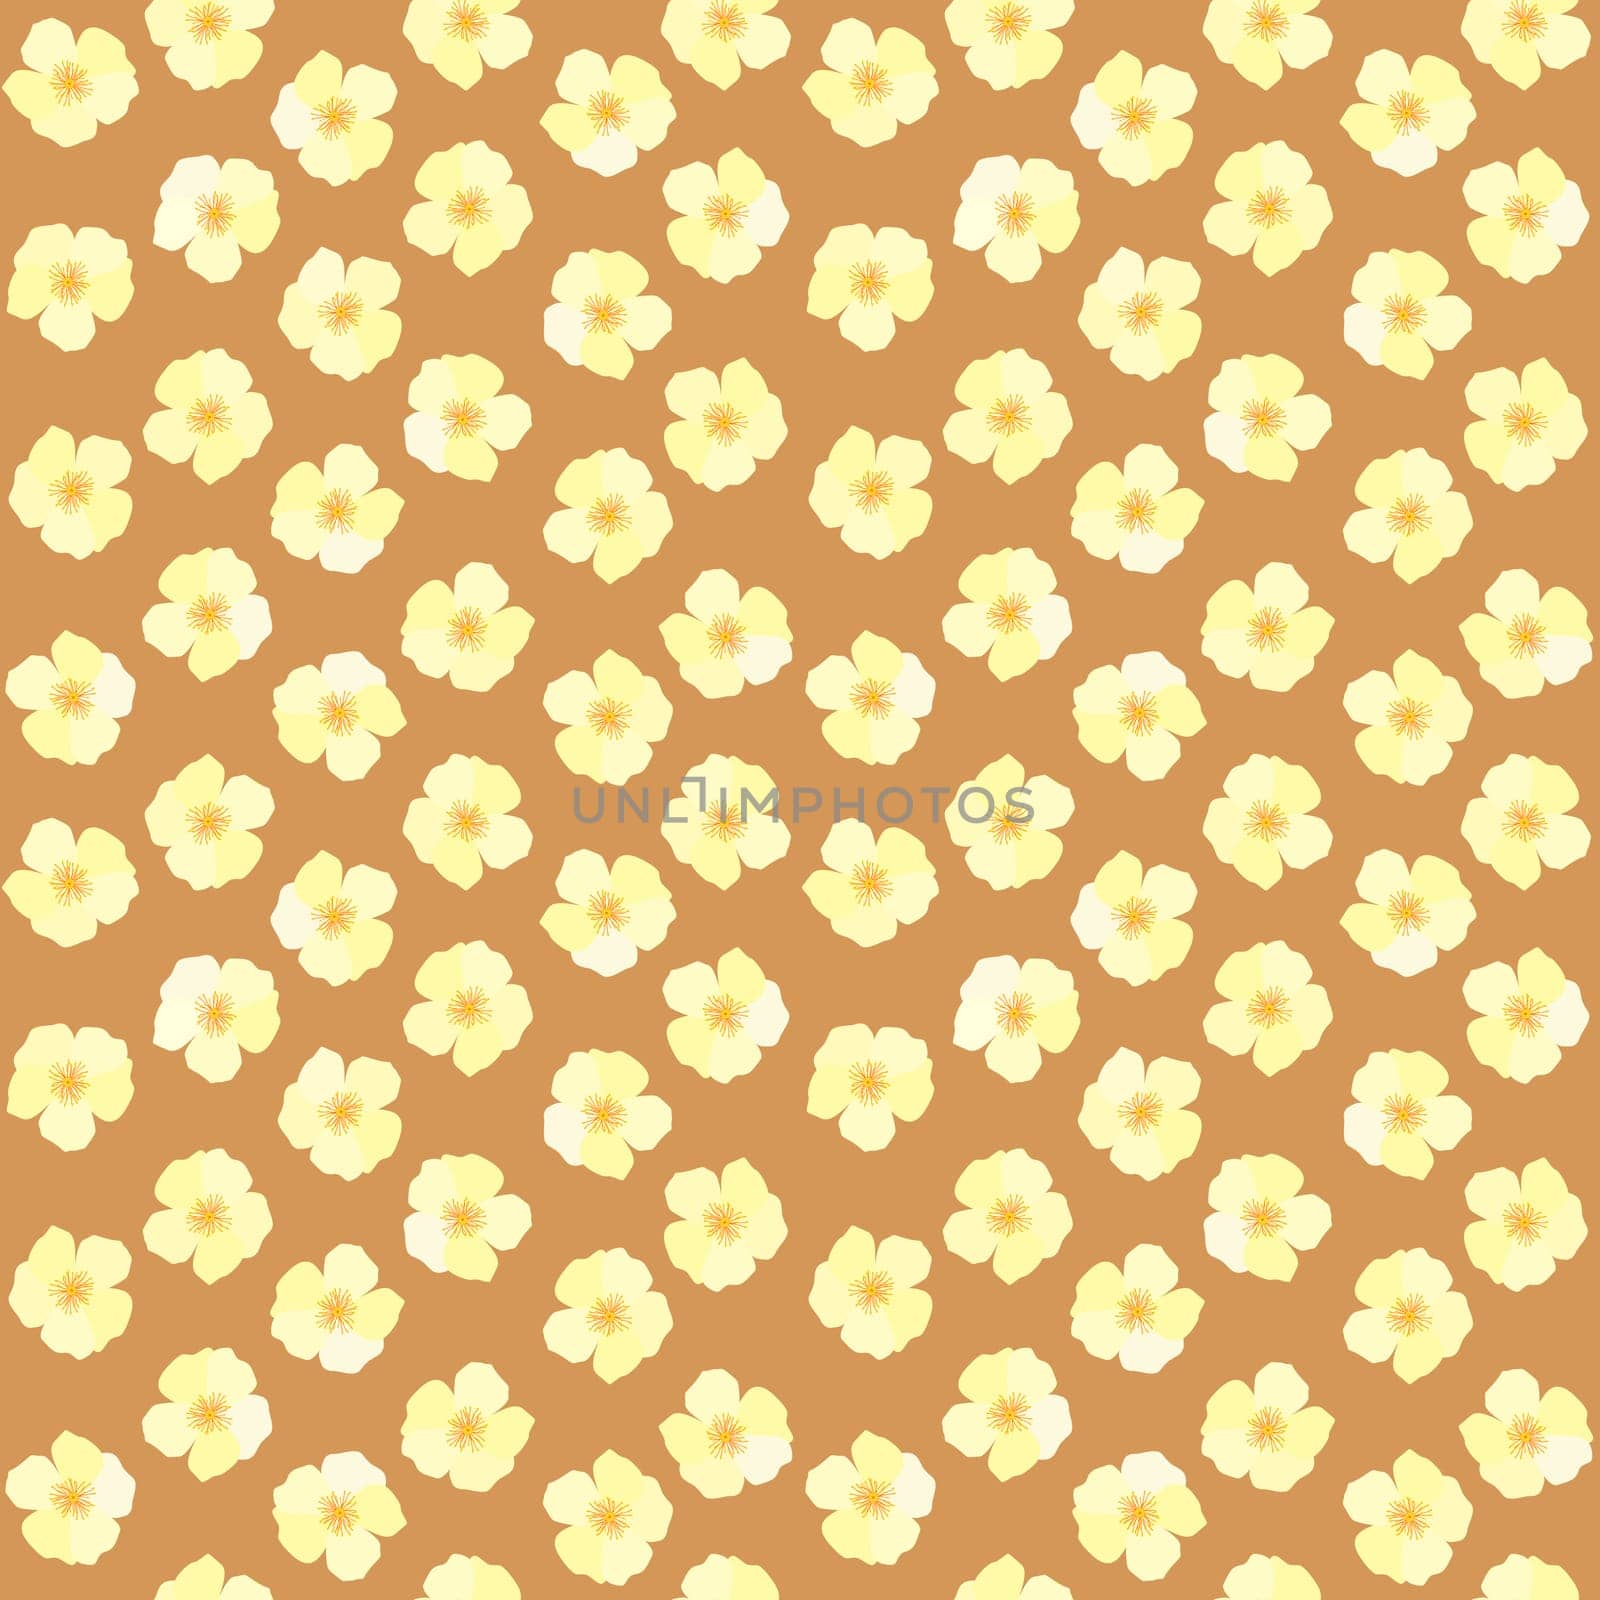 Floral seamless pattern with delicate yellow  blossoms on a brown background by hibrida13